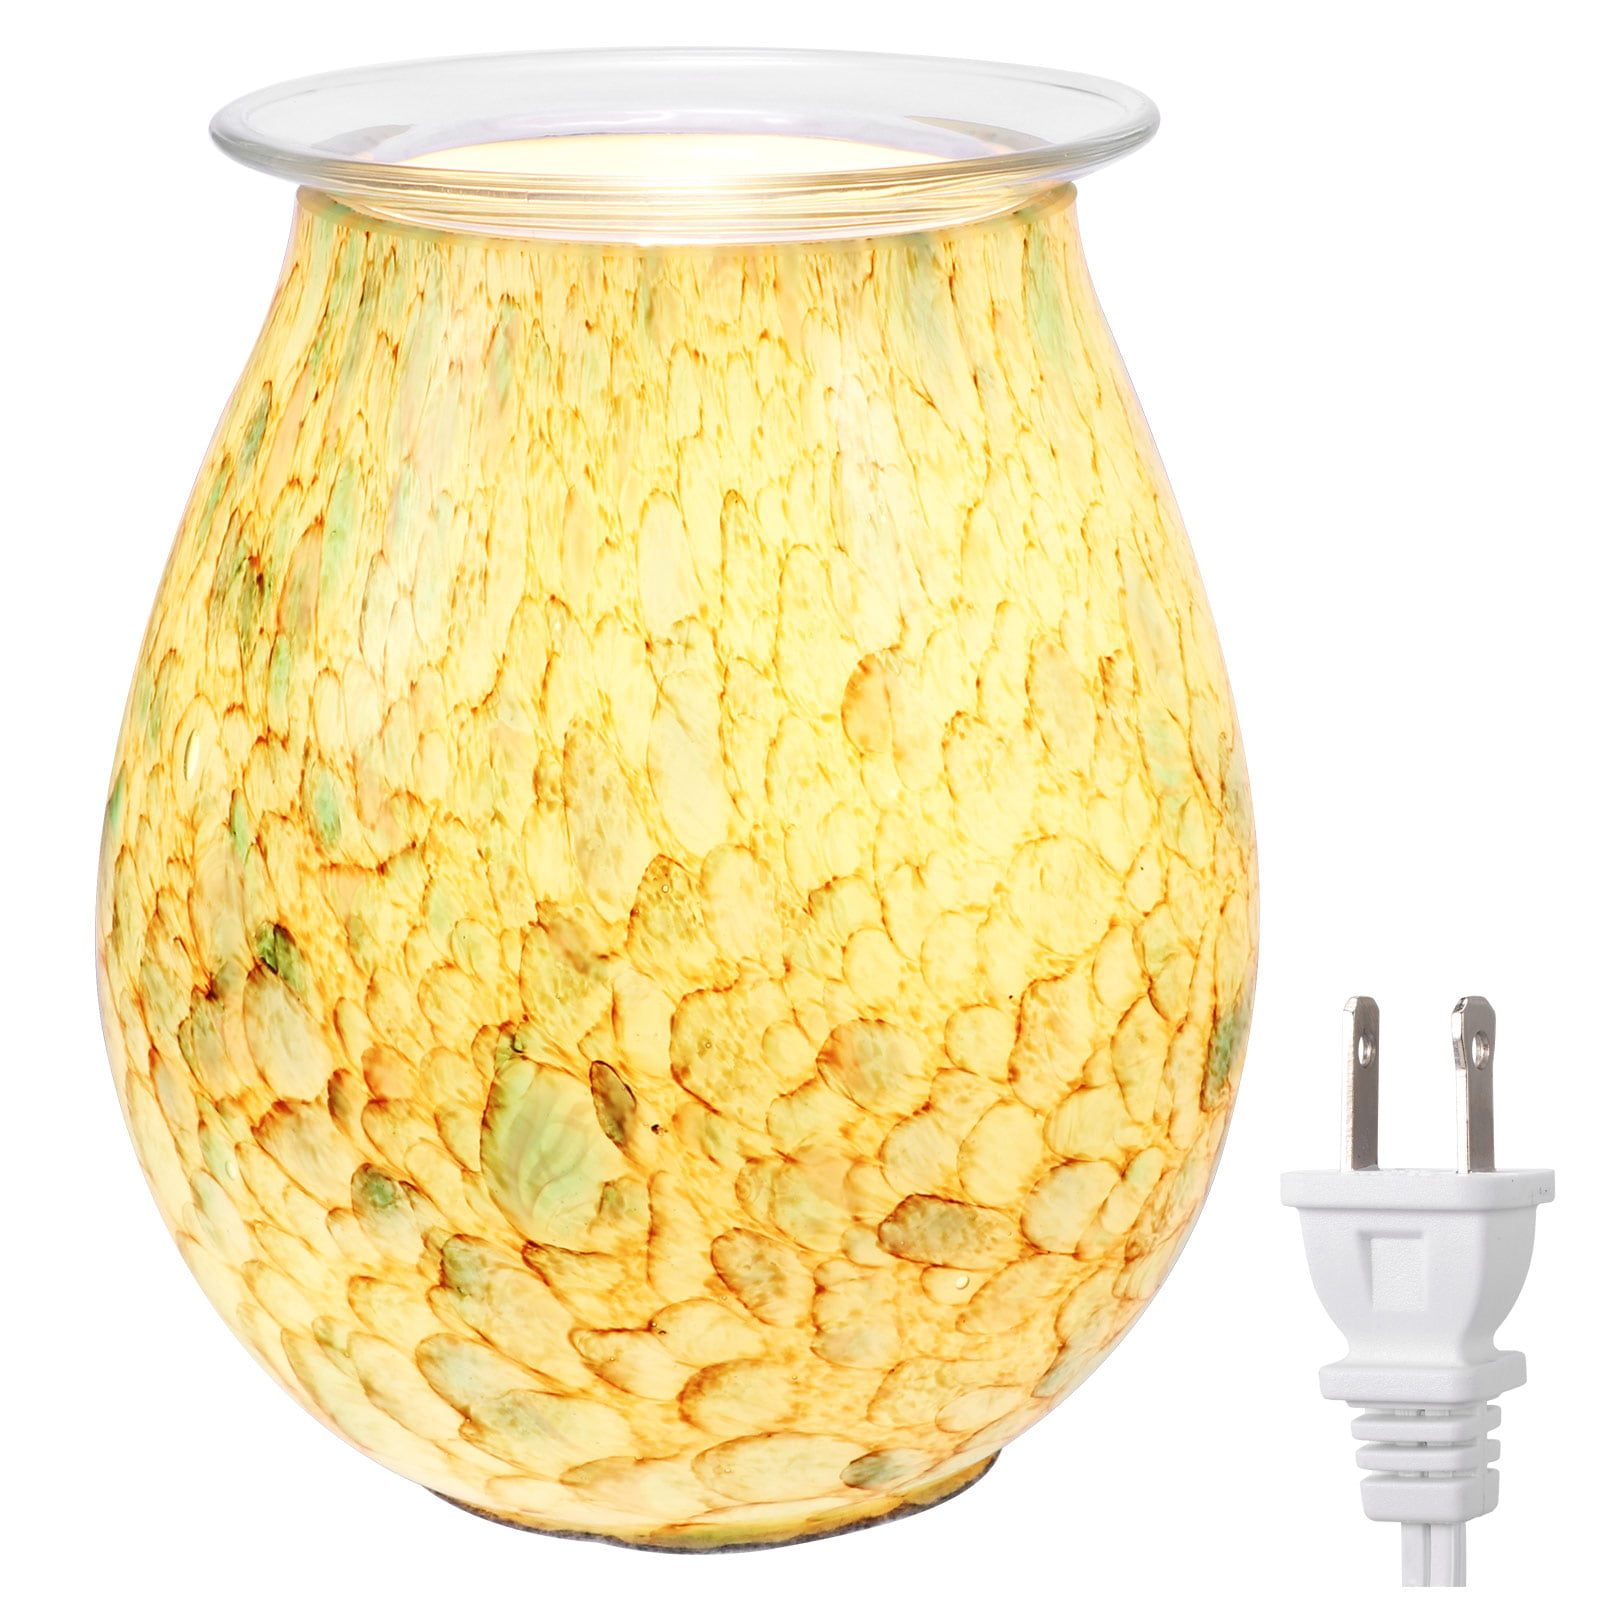 TeaLamp electric aroma and fragrance lamp ! 